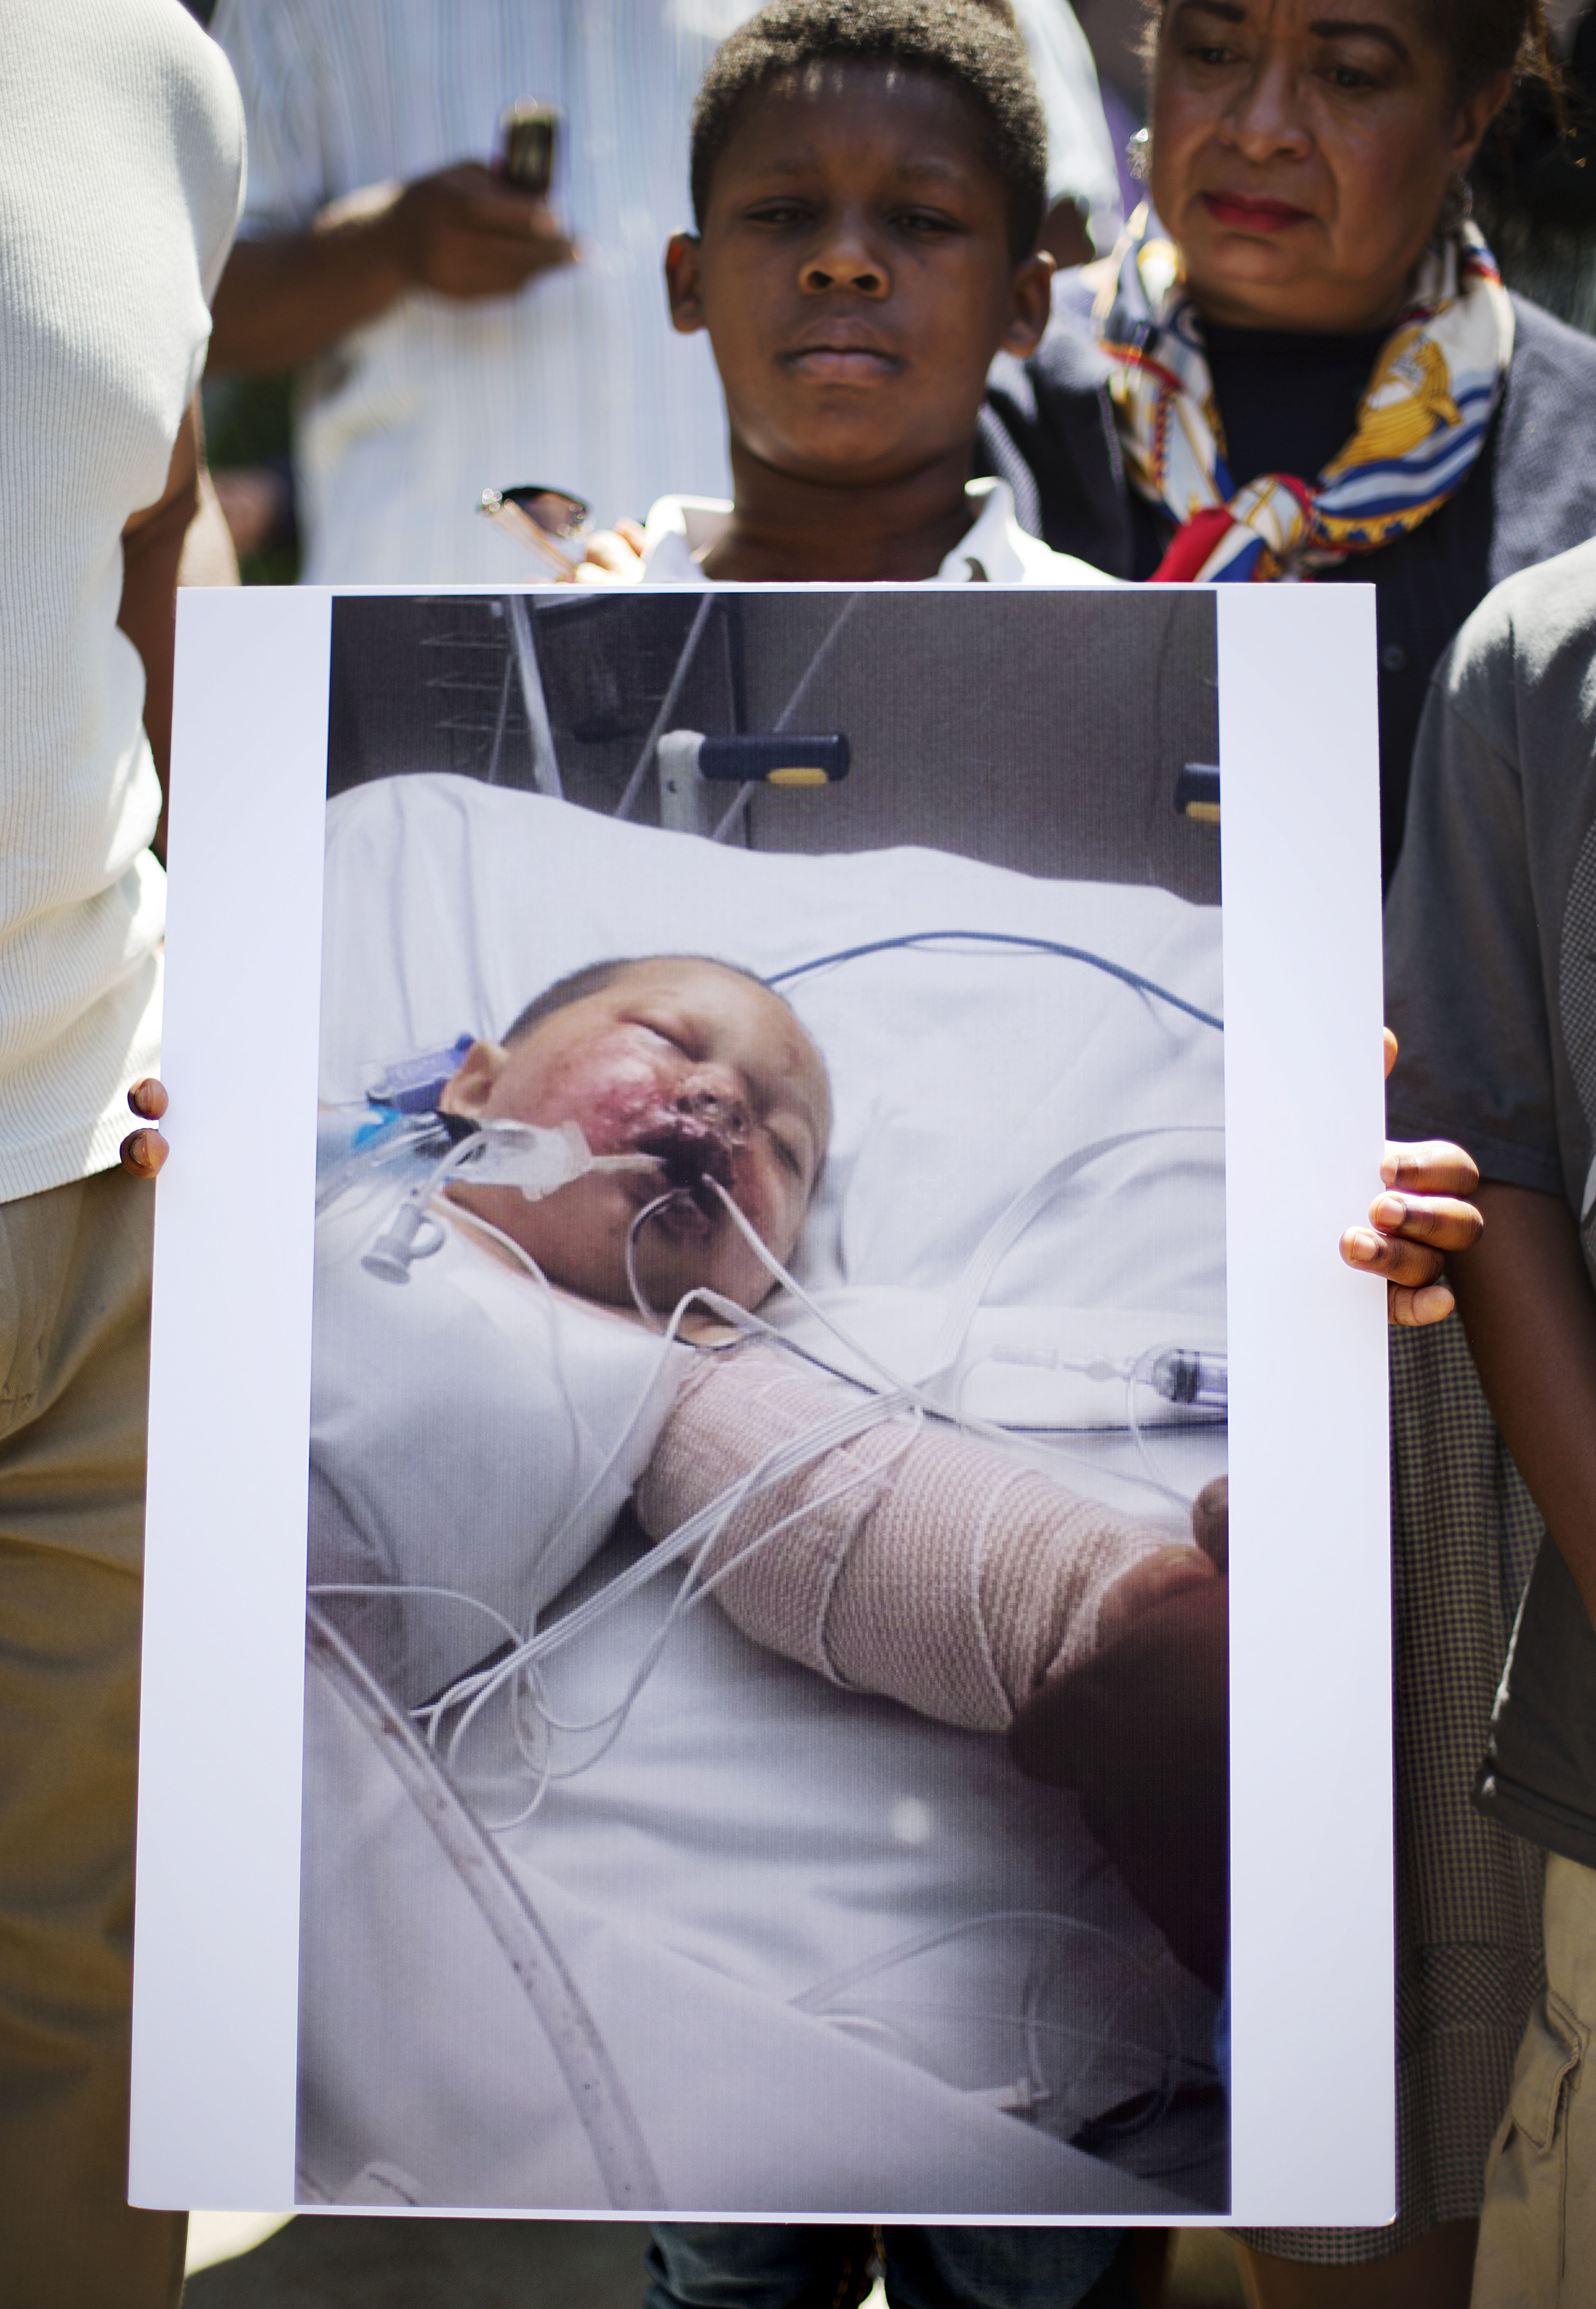 A photo of 19-month-old Bounkham Phonesavanh, who was severely burned by a flash grenade during a SWAT drug raid, is held by a supporter outside Grady Memorial Hospital in Atlanta on June 2, 2014 (David Goldman—AP)